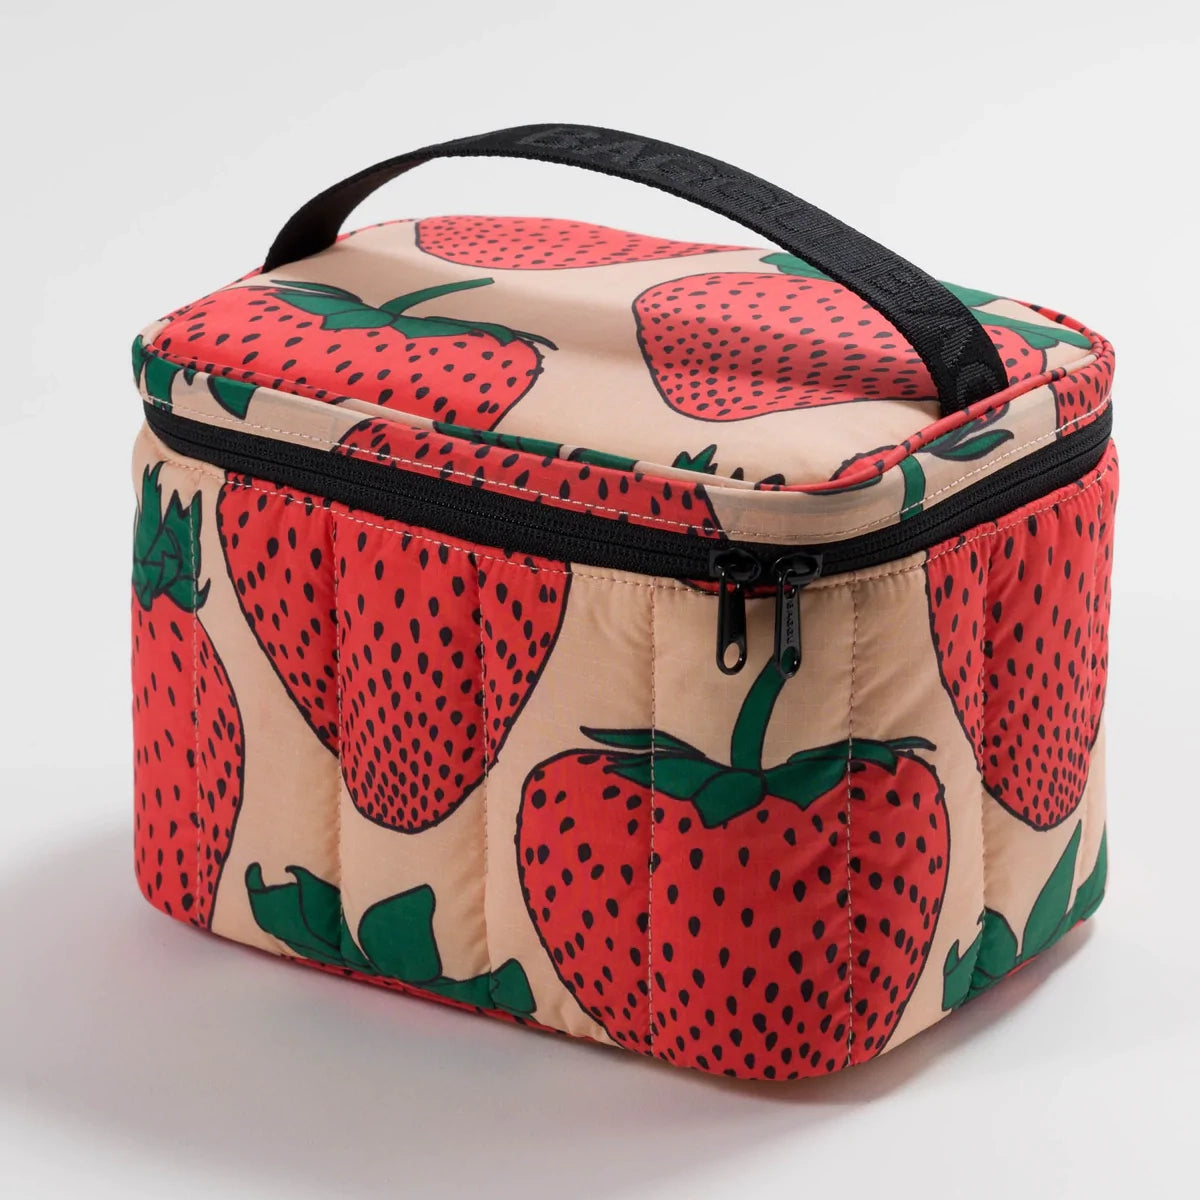 Puffy Lunch Tote Bag